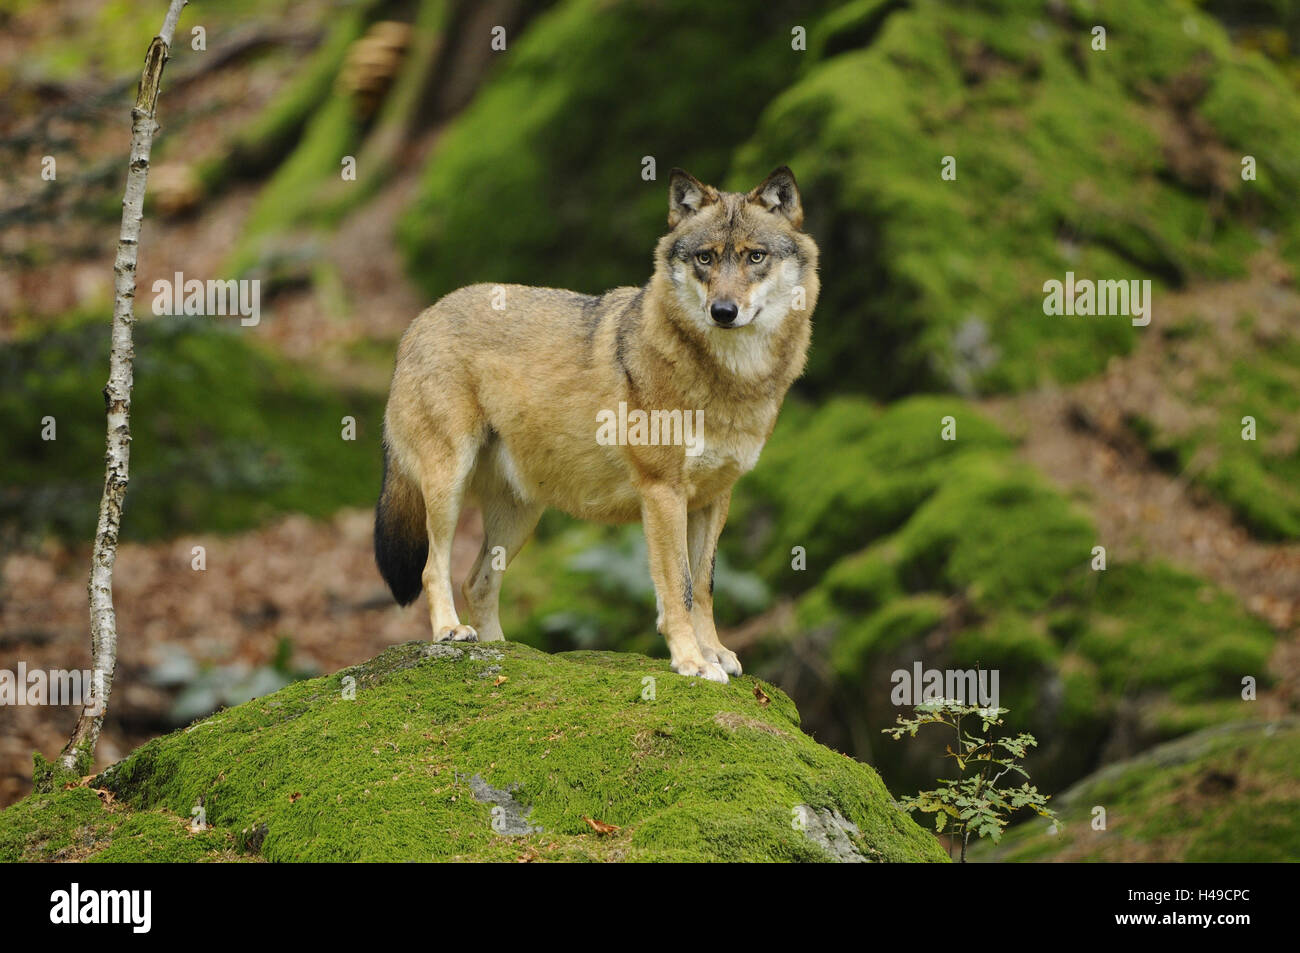 Le loup gris d'Europe, Canis lupus lupus, rock, debout, looking at camera, Banque D'Images